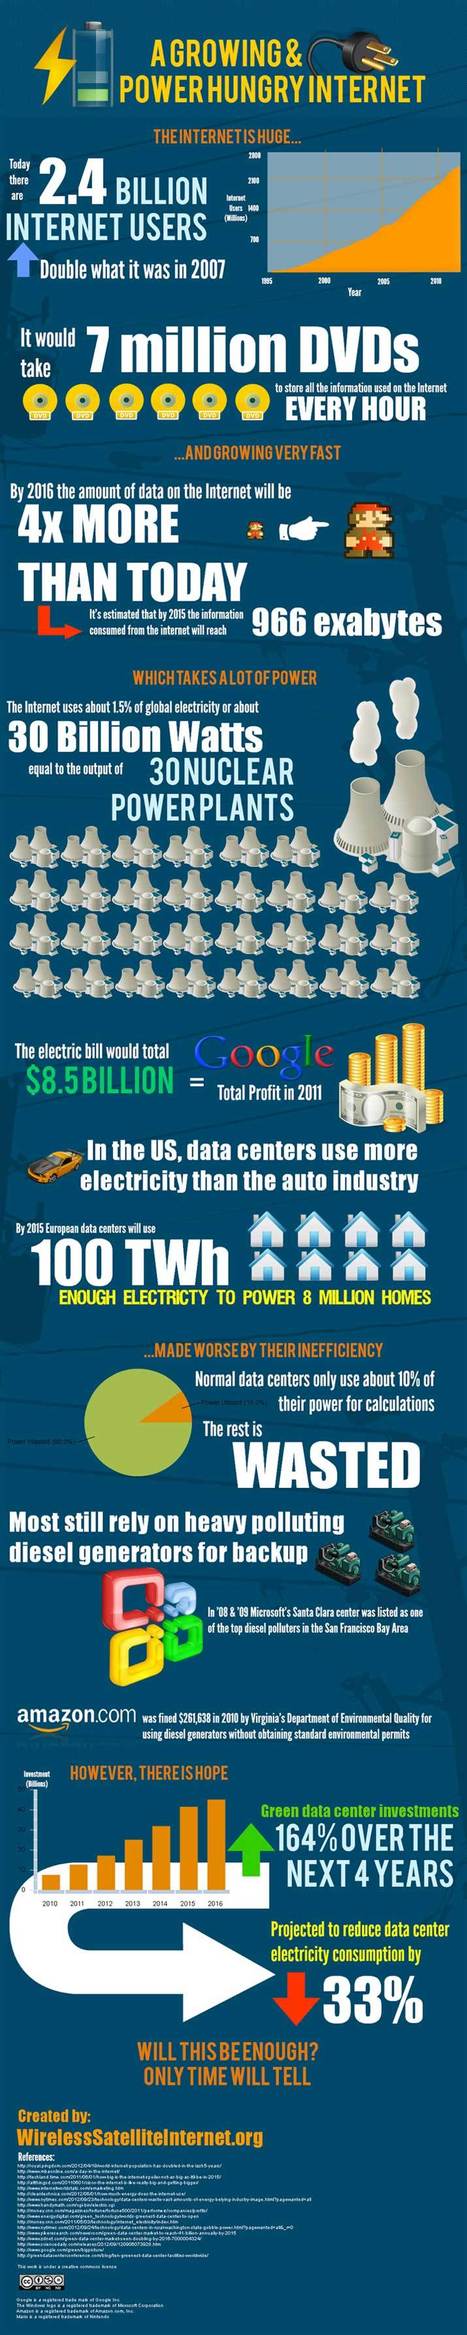 How Much Is the Internet's Electric Bill? [INFOGRAPHIC] | WEBOLUTION! | Scoop.it